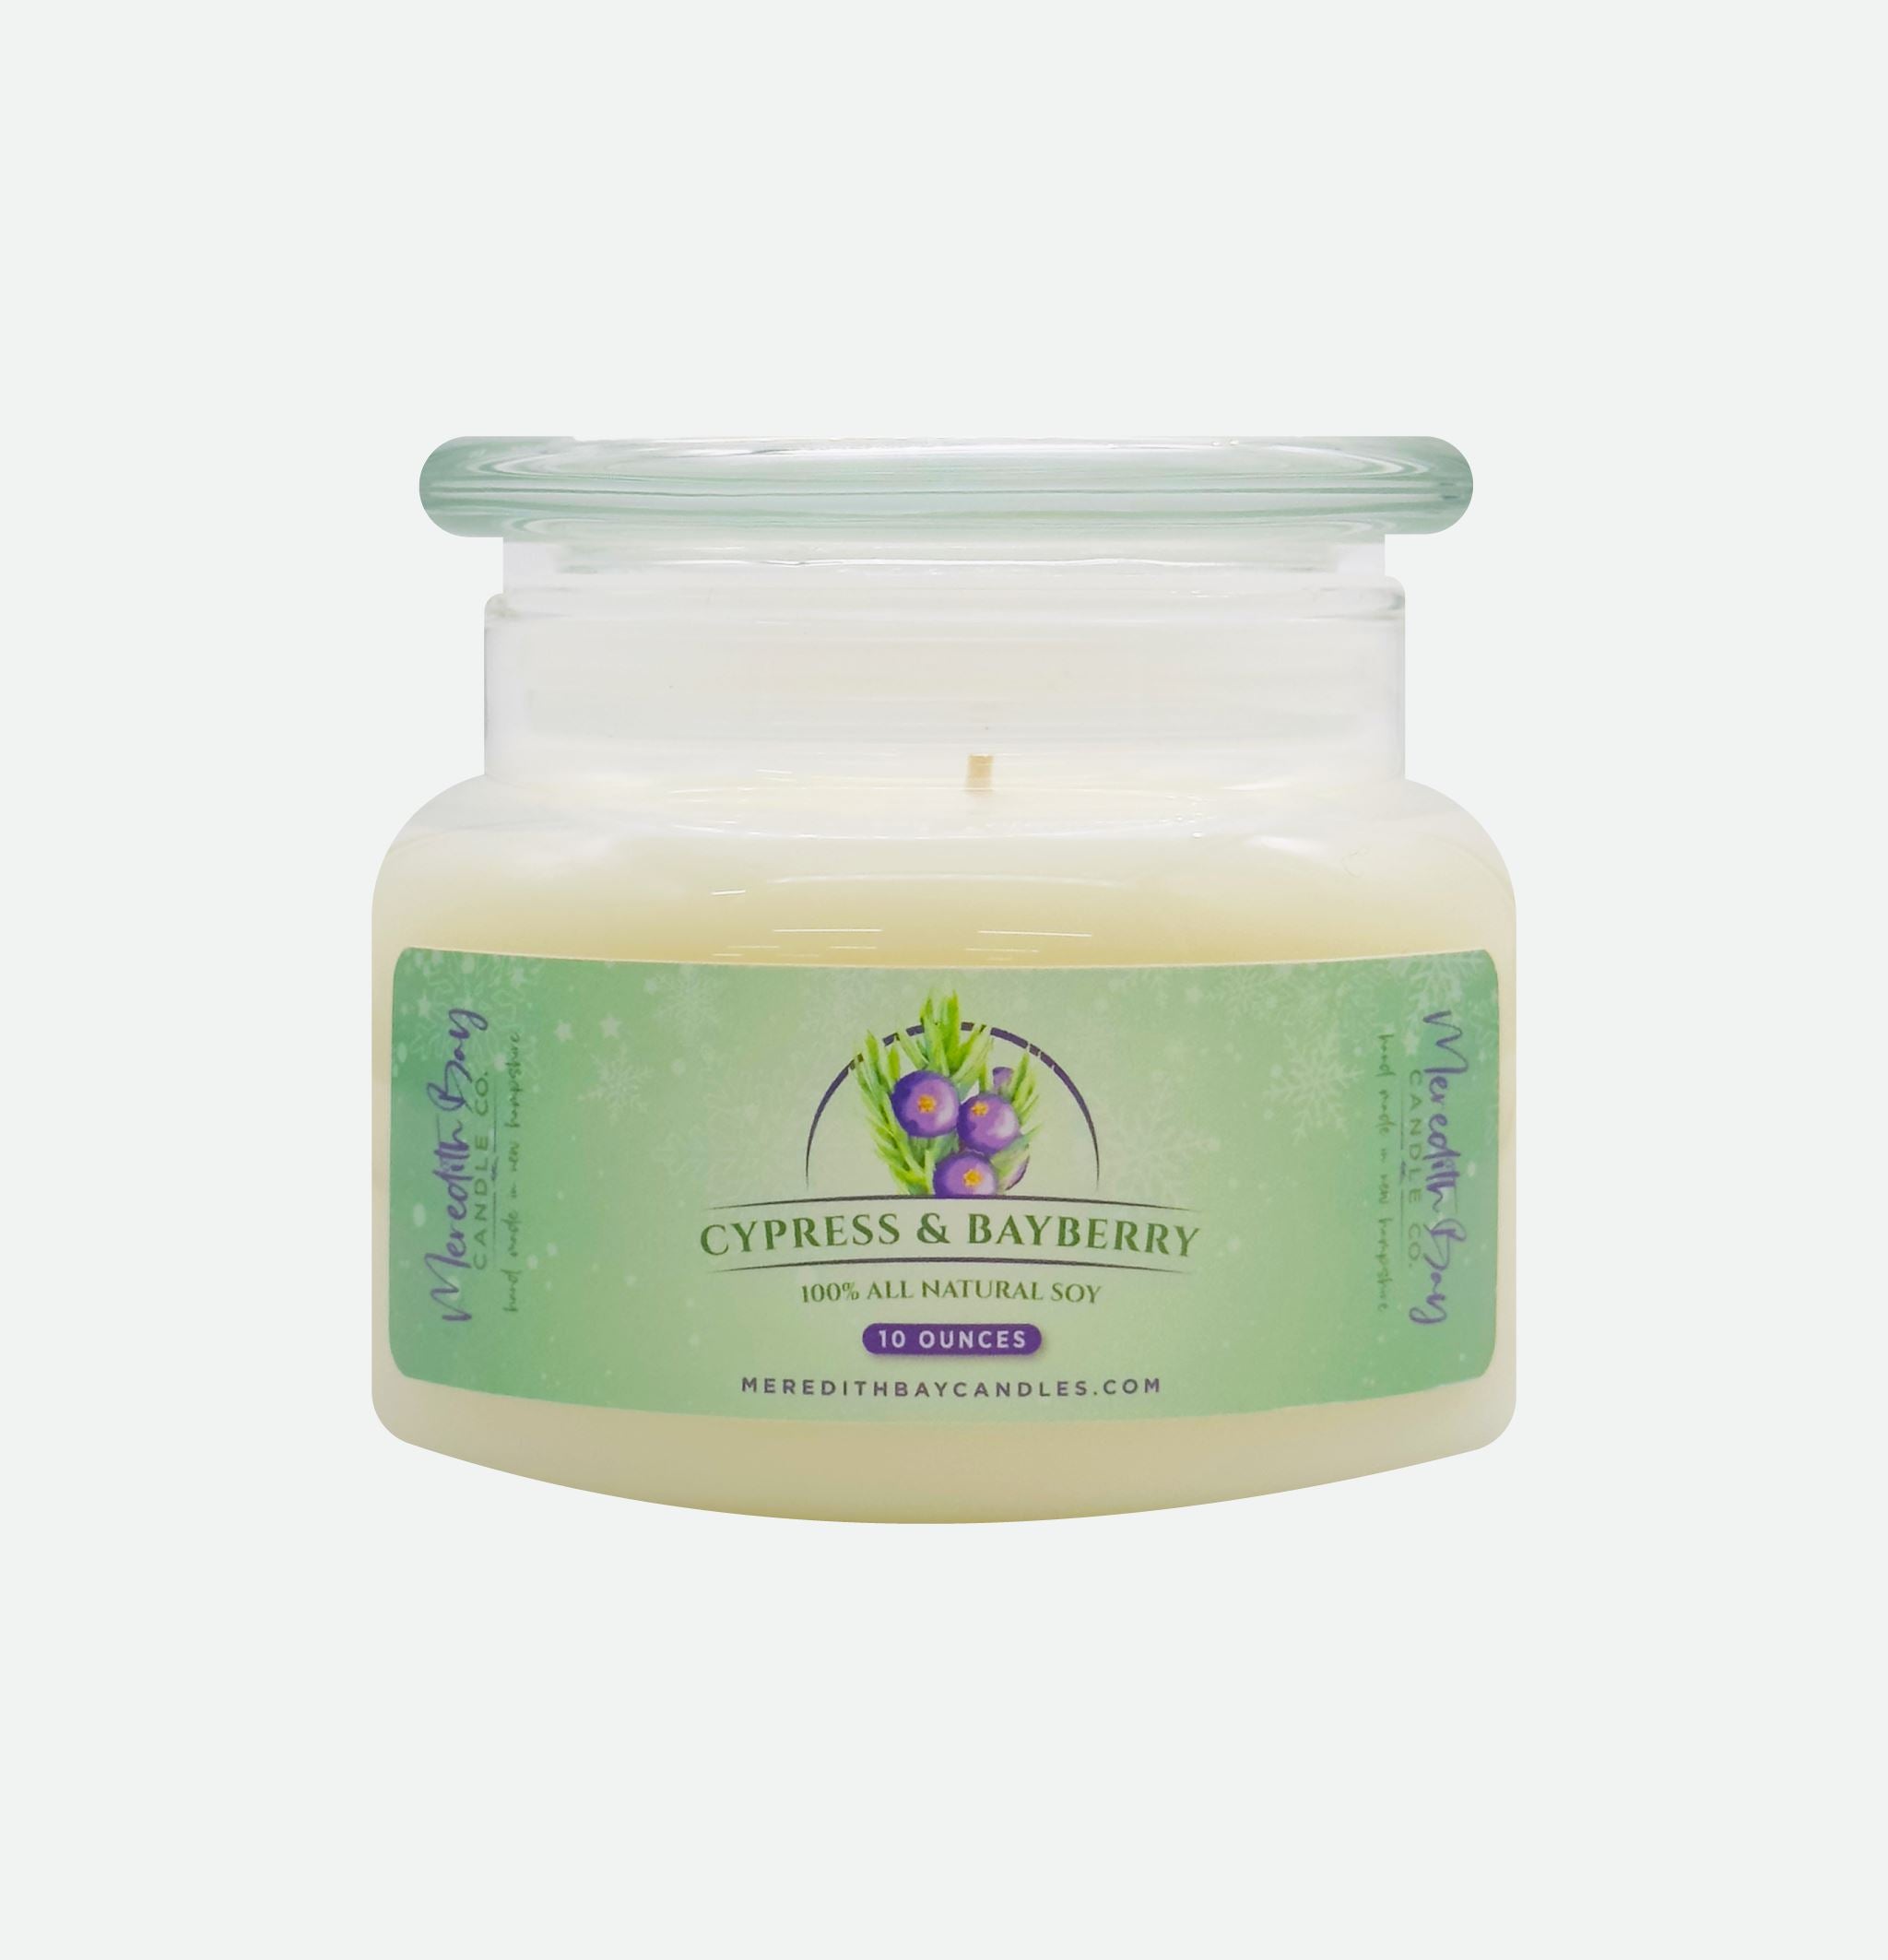 Cypress & Bayberry Soy Candle Meredith Bay Candle Co 10 Oz 